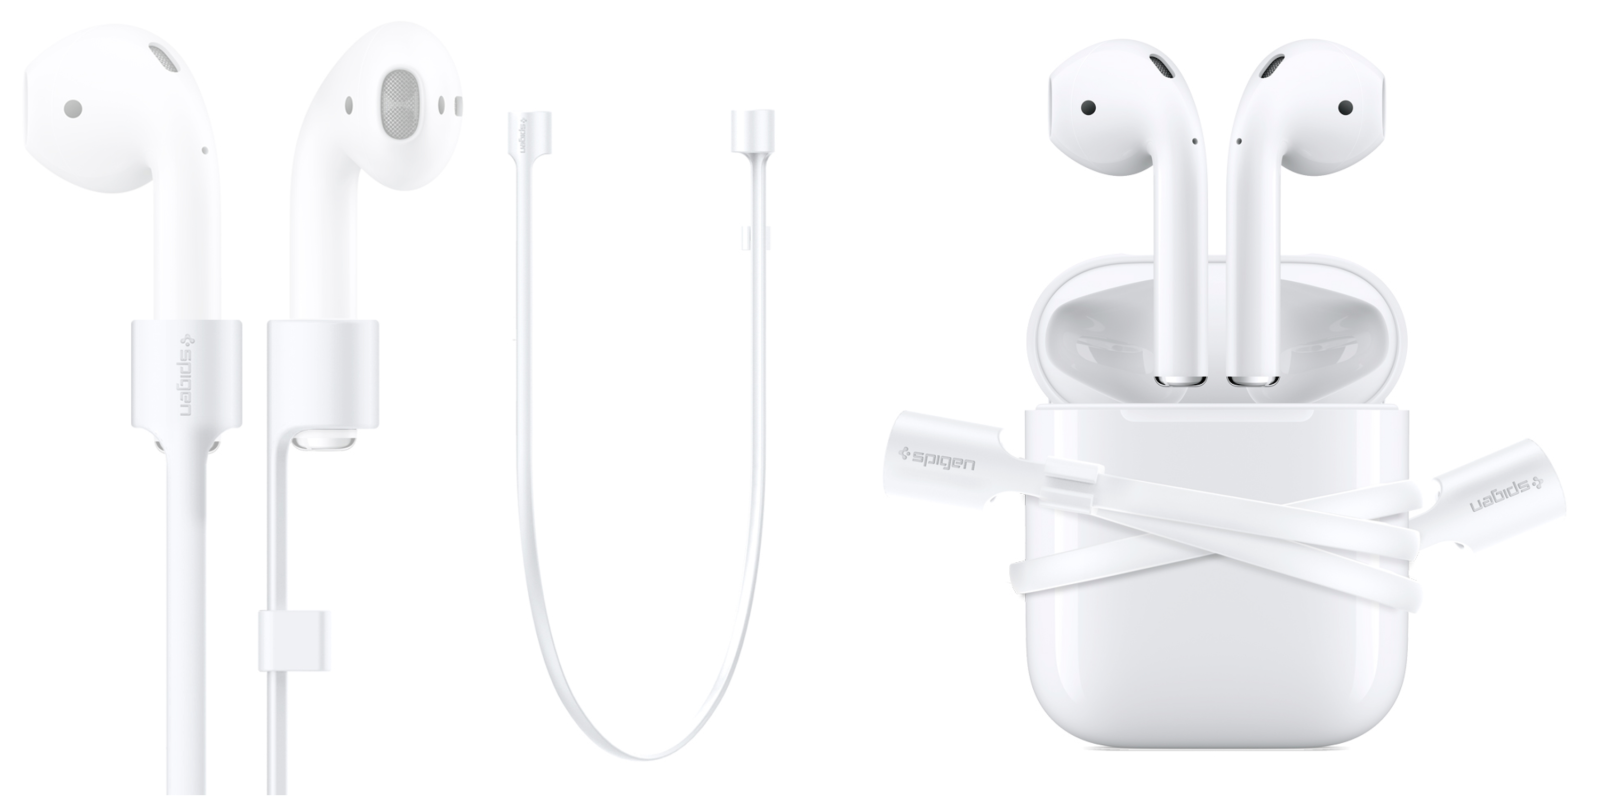 Never lose Apple's new wireless AirPods iPhone 7 w/ $10 AirPods - 9to5Mac